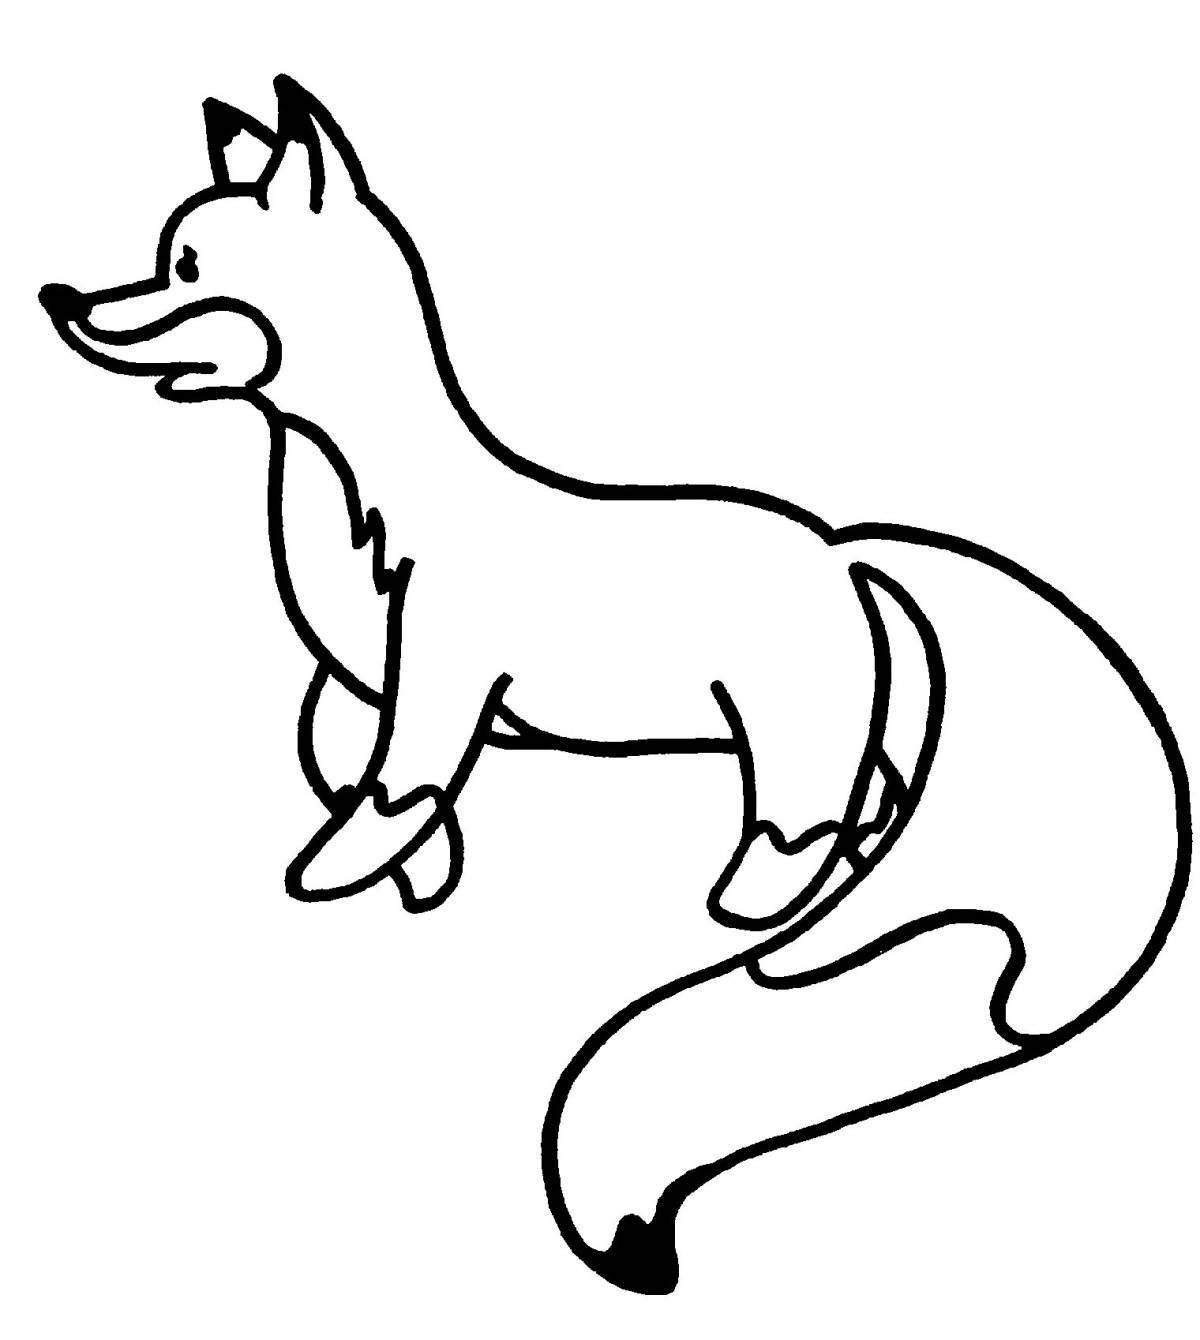 Animated fox coloring book for children 6-7 years old